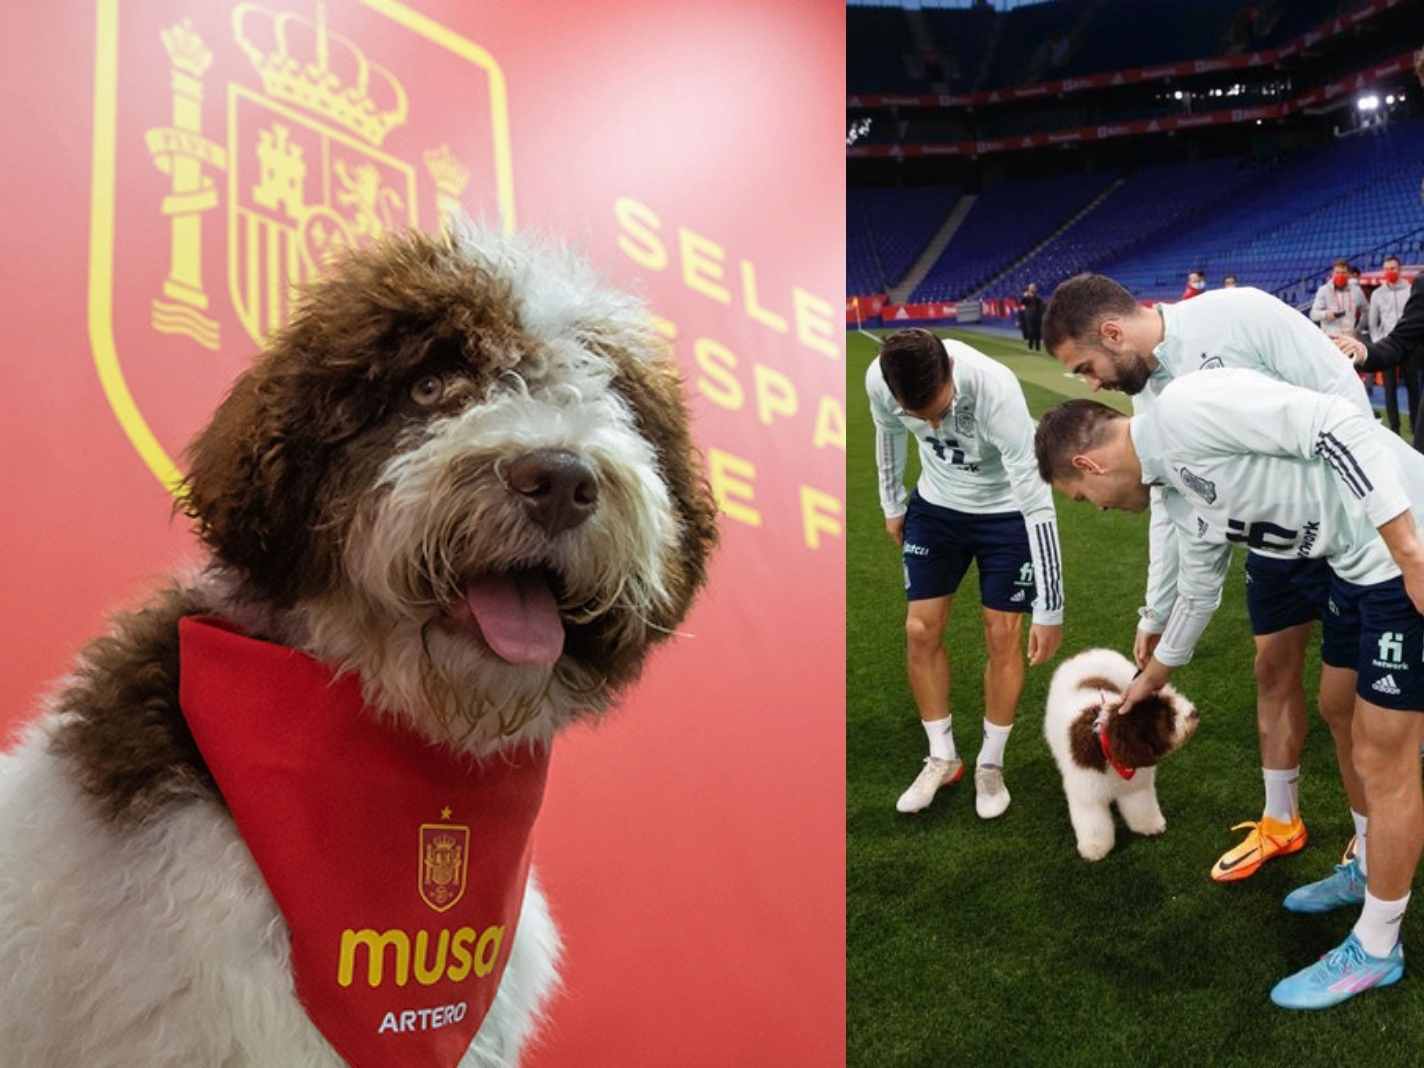 Musa – Meet the dog that will inspire Spain to win the Qatar World Cup